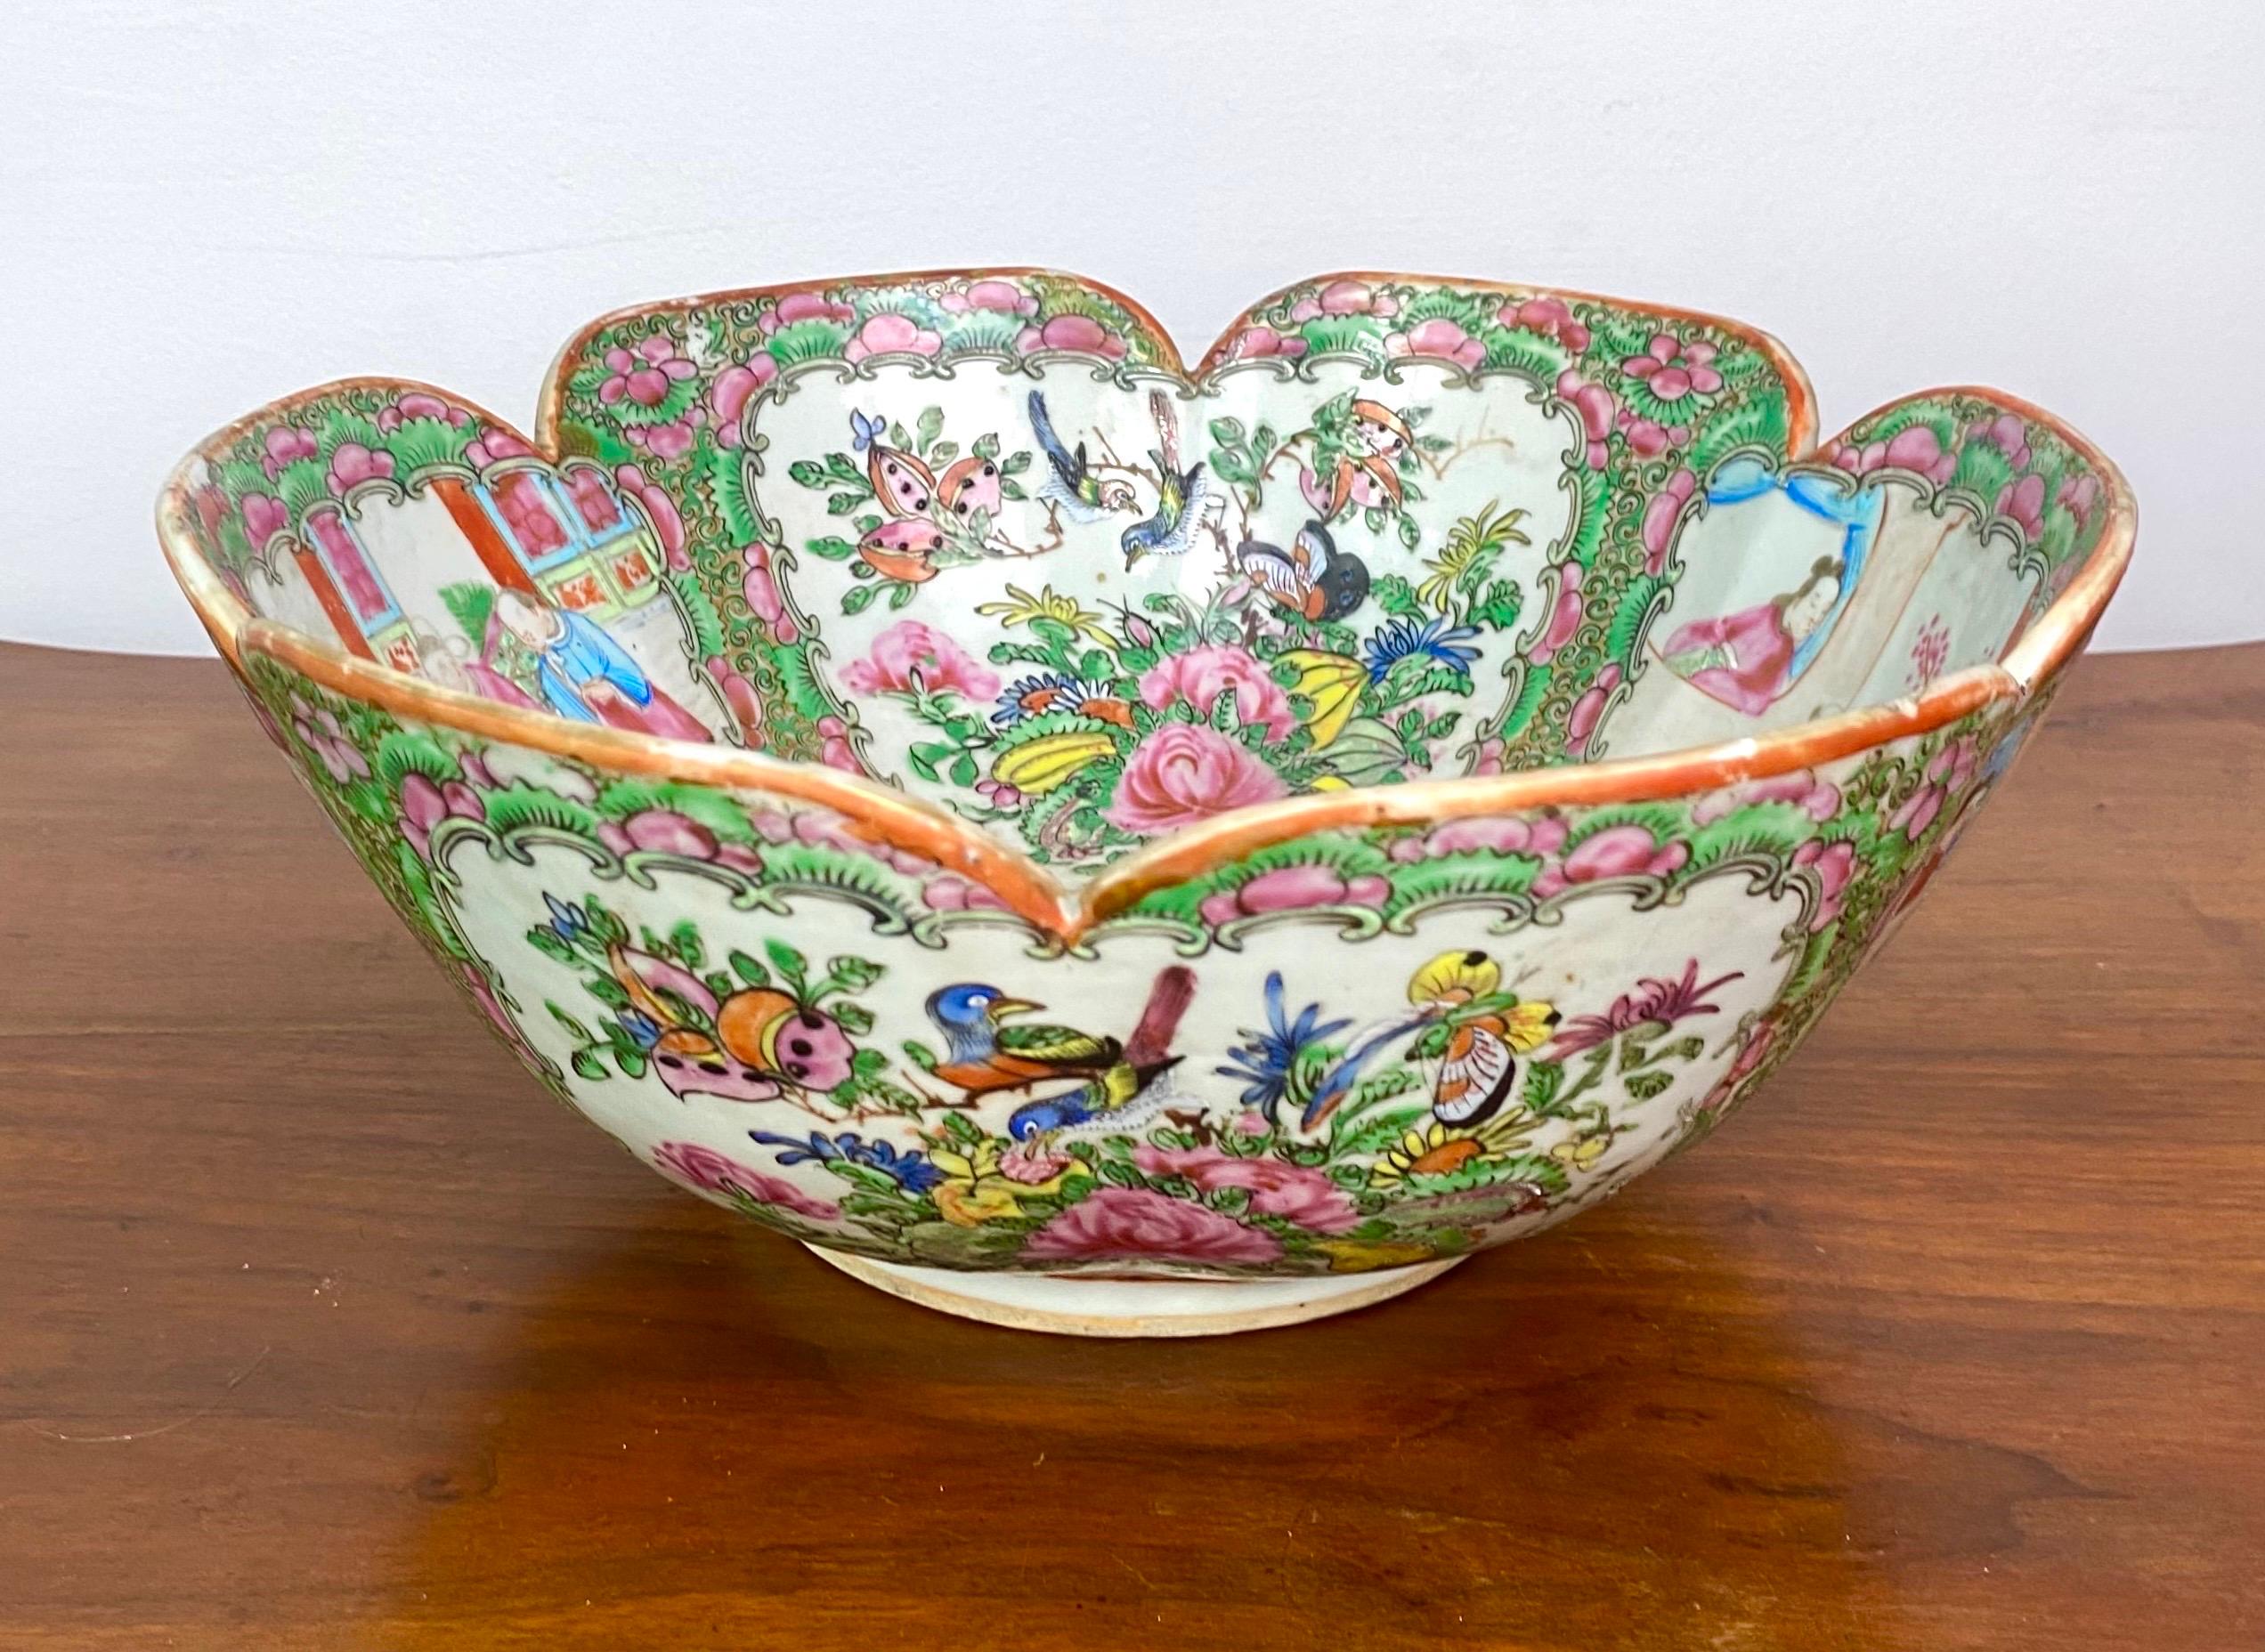 Magnificent hand-painted Chinese porcelain bowl with enameled and gilded decoration in reserve of characters in palace scenes, birds and flowers, with the “Famille Rose” motif, with a scalloped edge. .
The bowl has a white bottom and base. It is